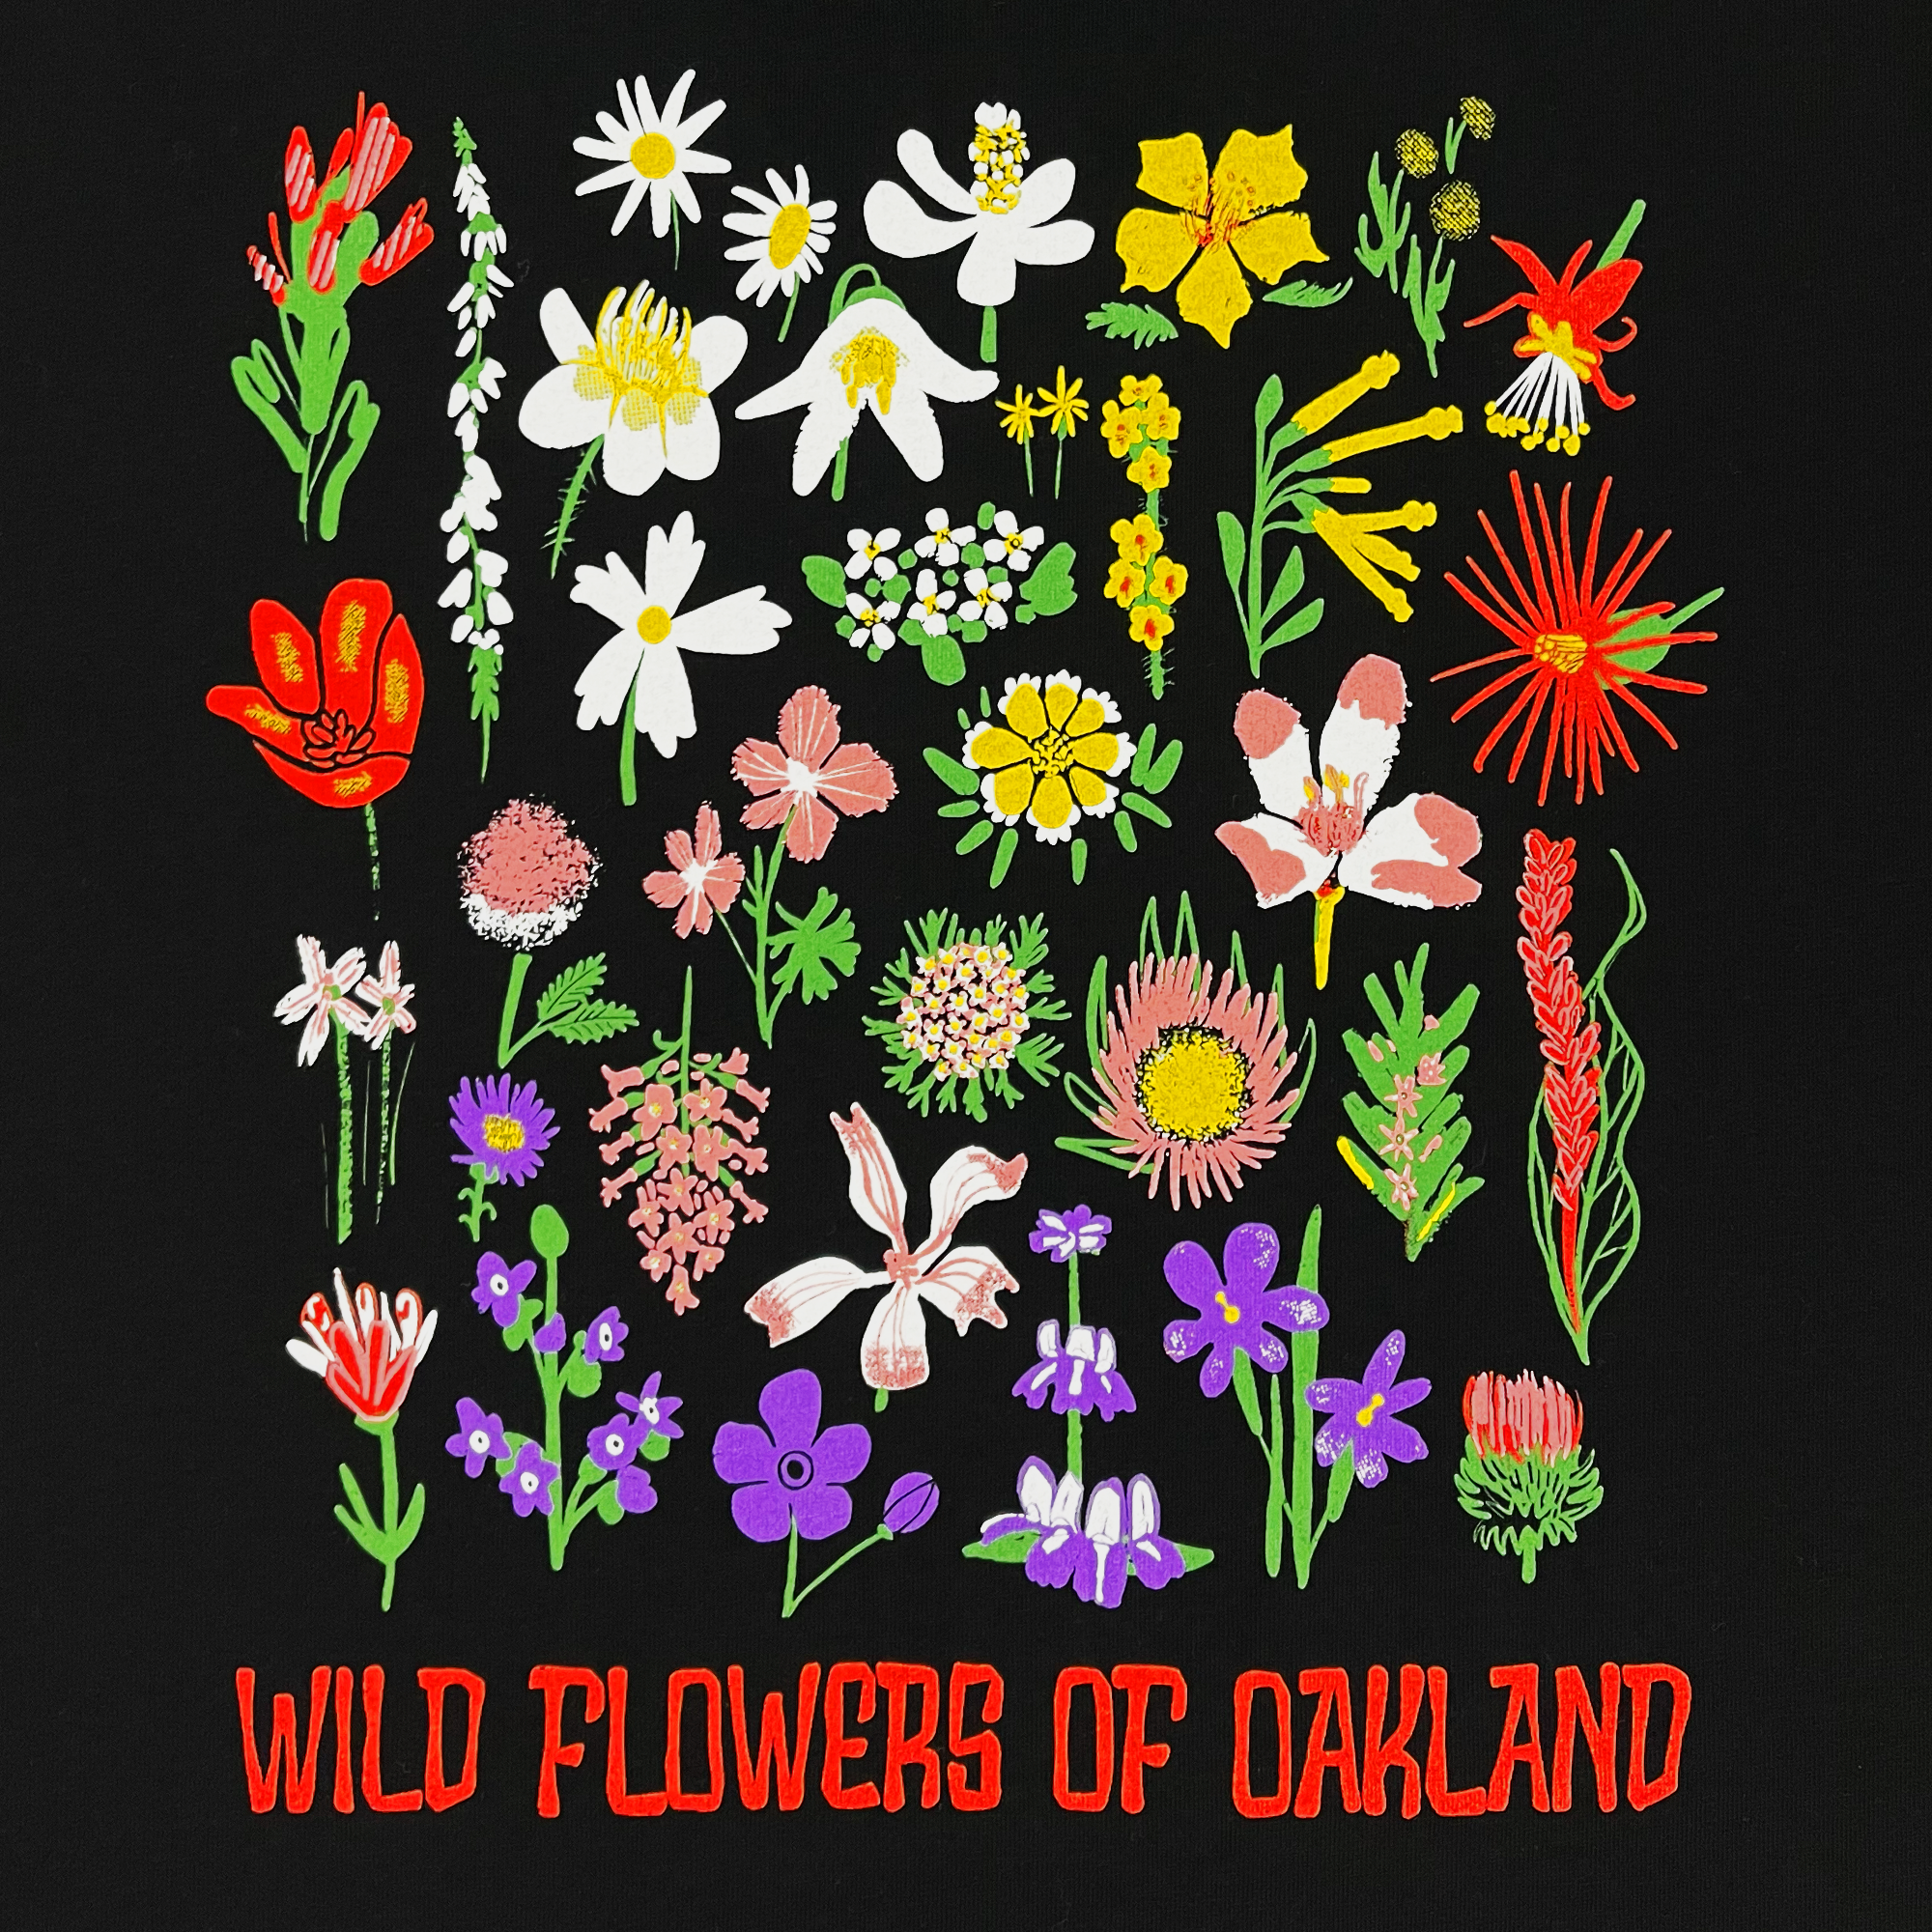 Detailed close-up of graphic depicting colorful wildflowers with a red WILD FLOWERS OF OAKLAND wordmark on a black t-shirt.